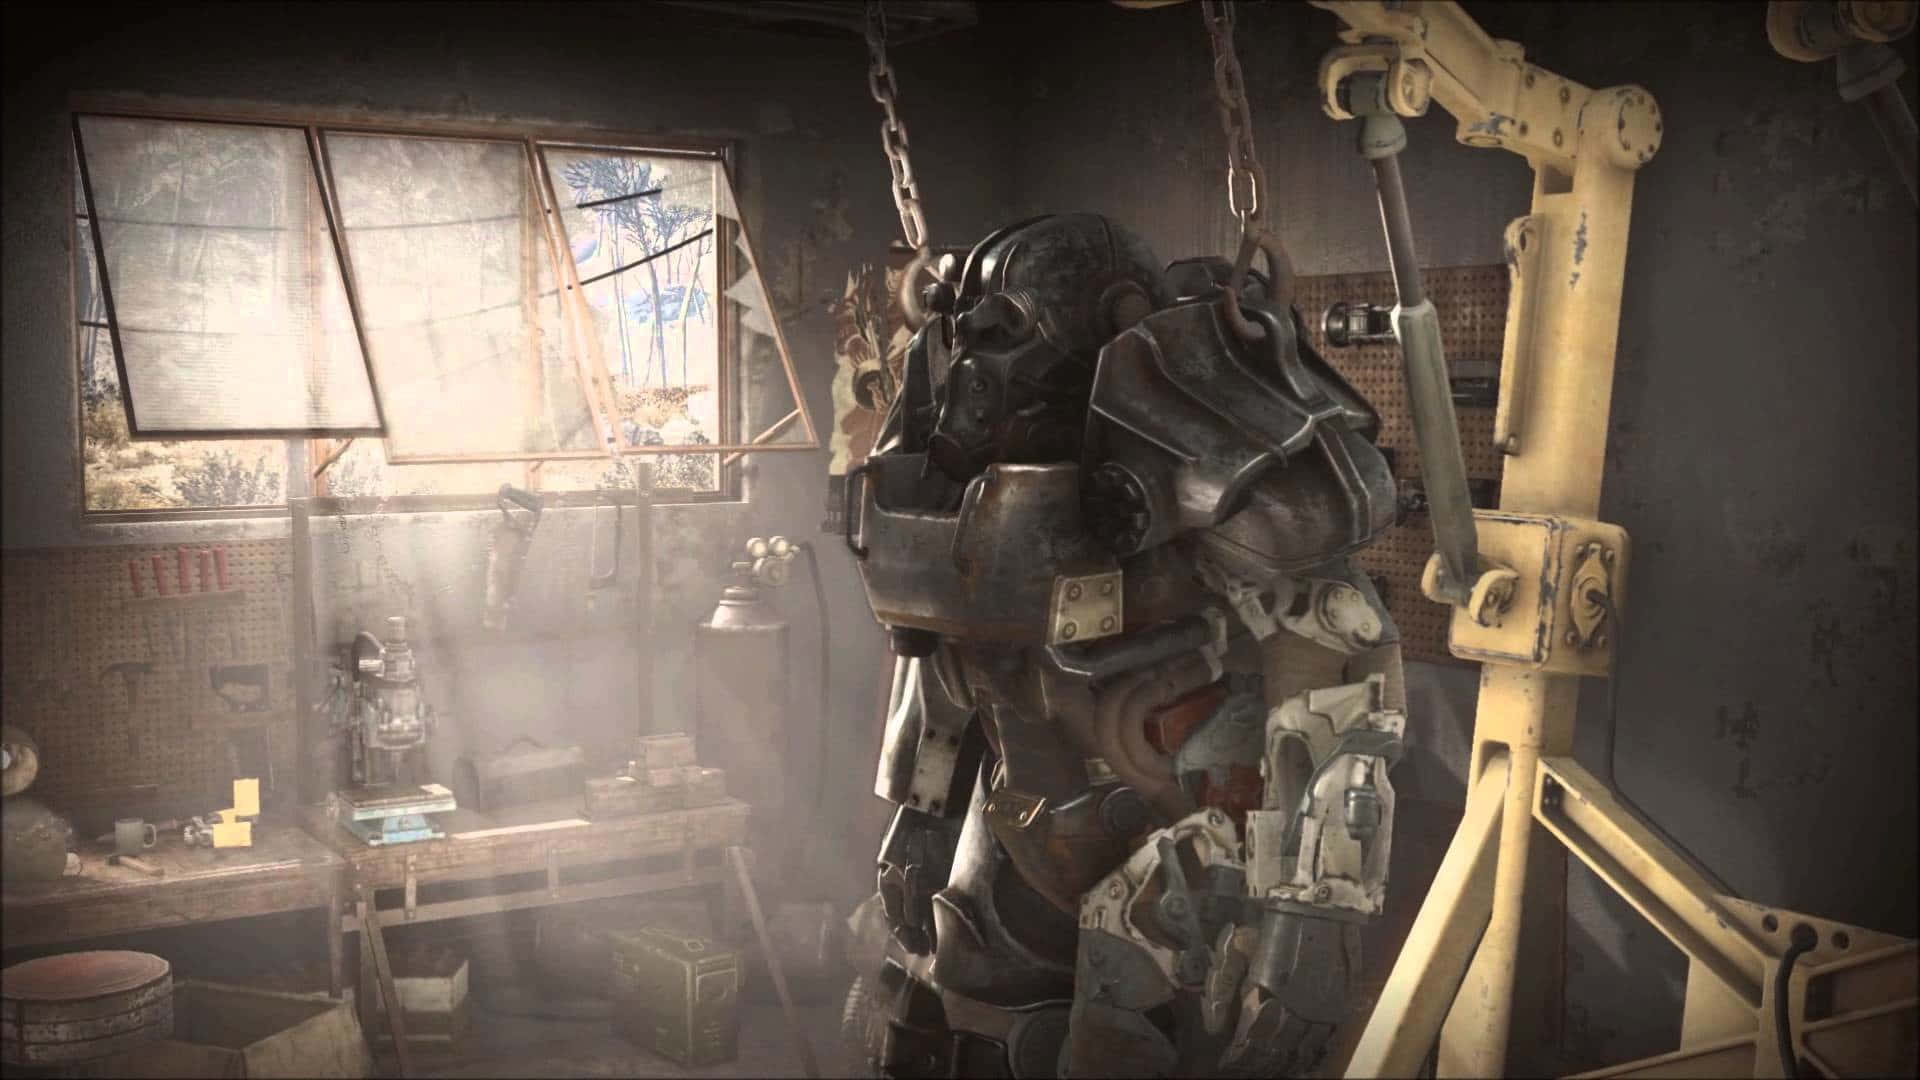 Intimidating Fallout 4 Power Armor in a battle stance Wallpaper